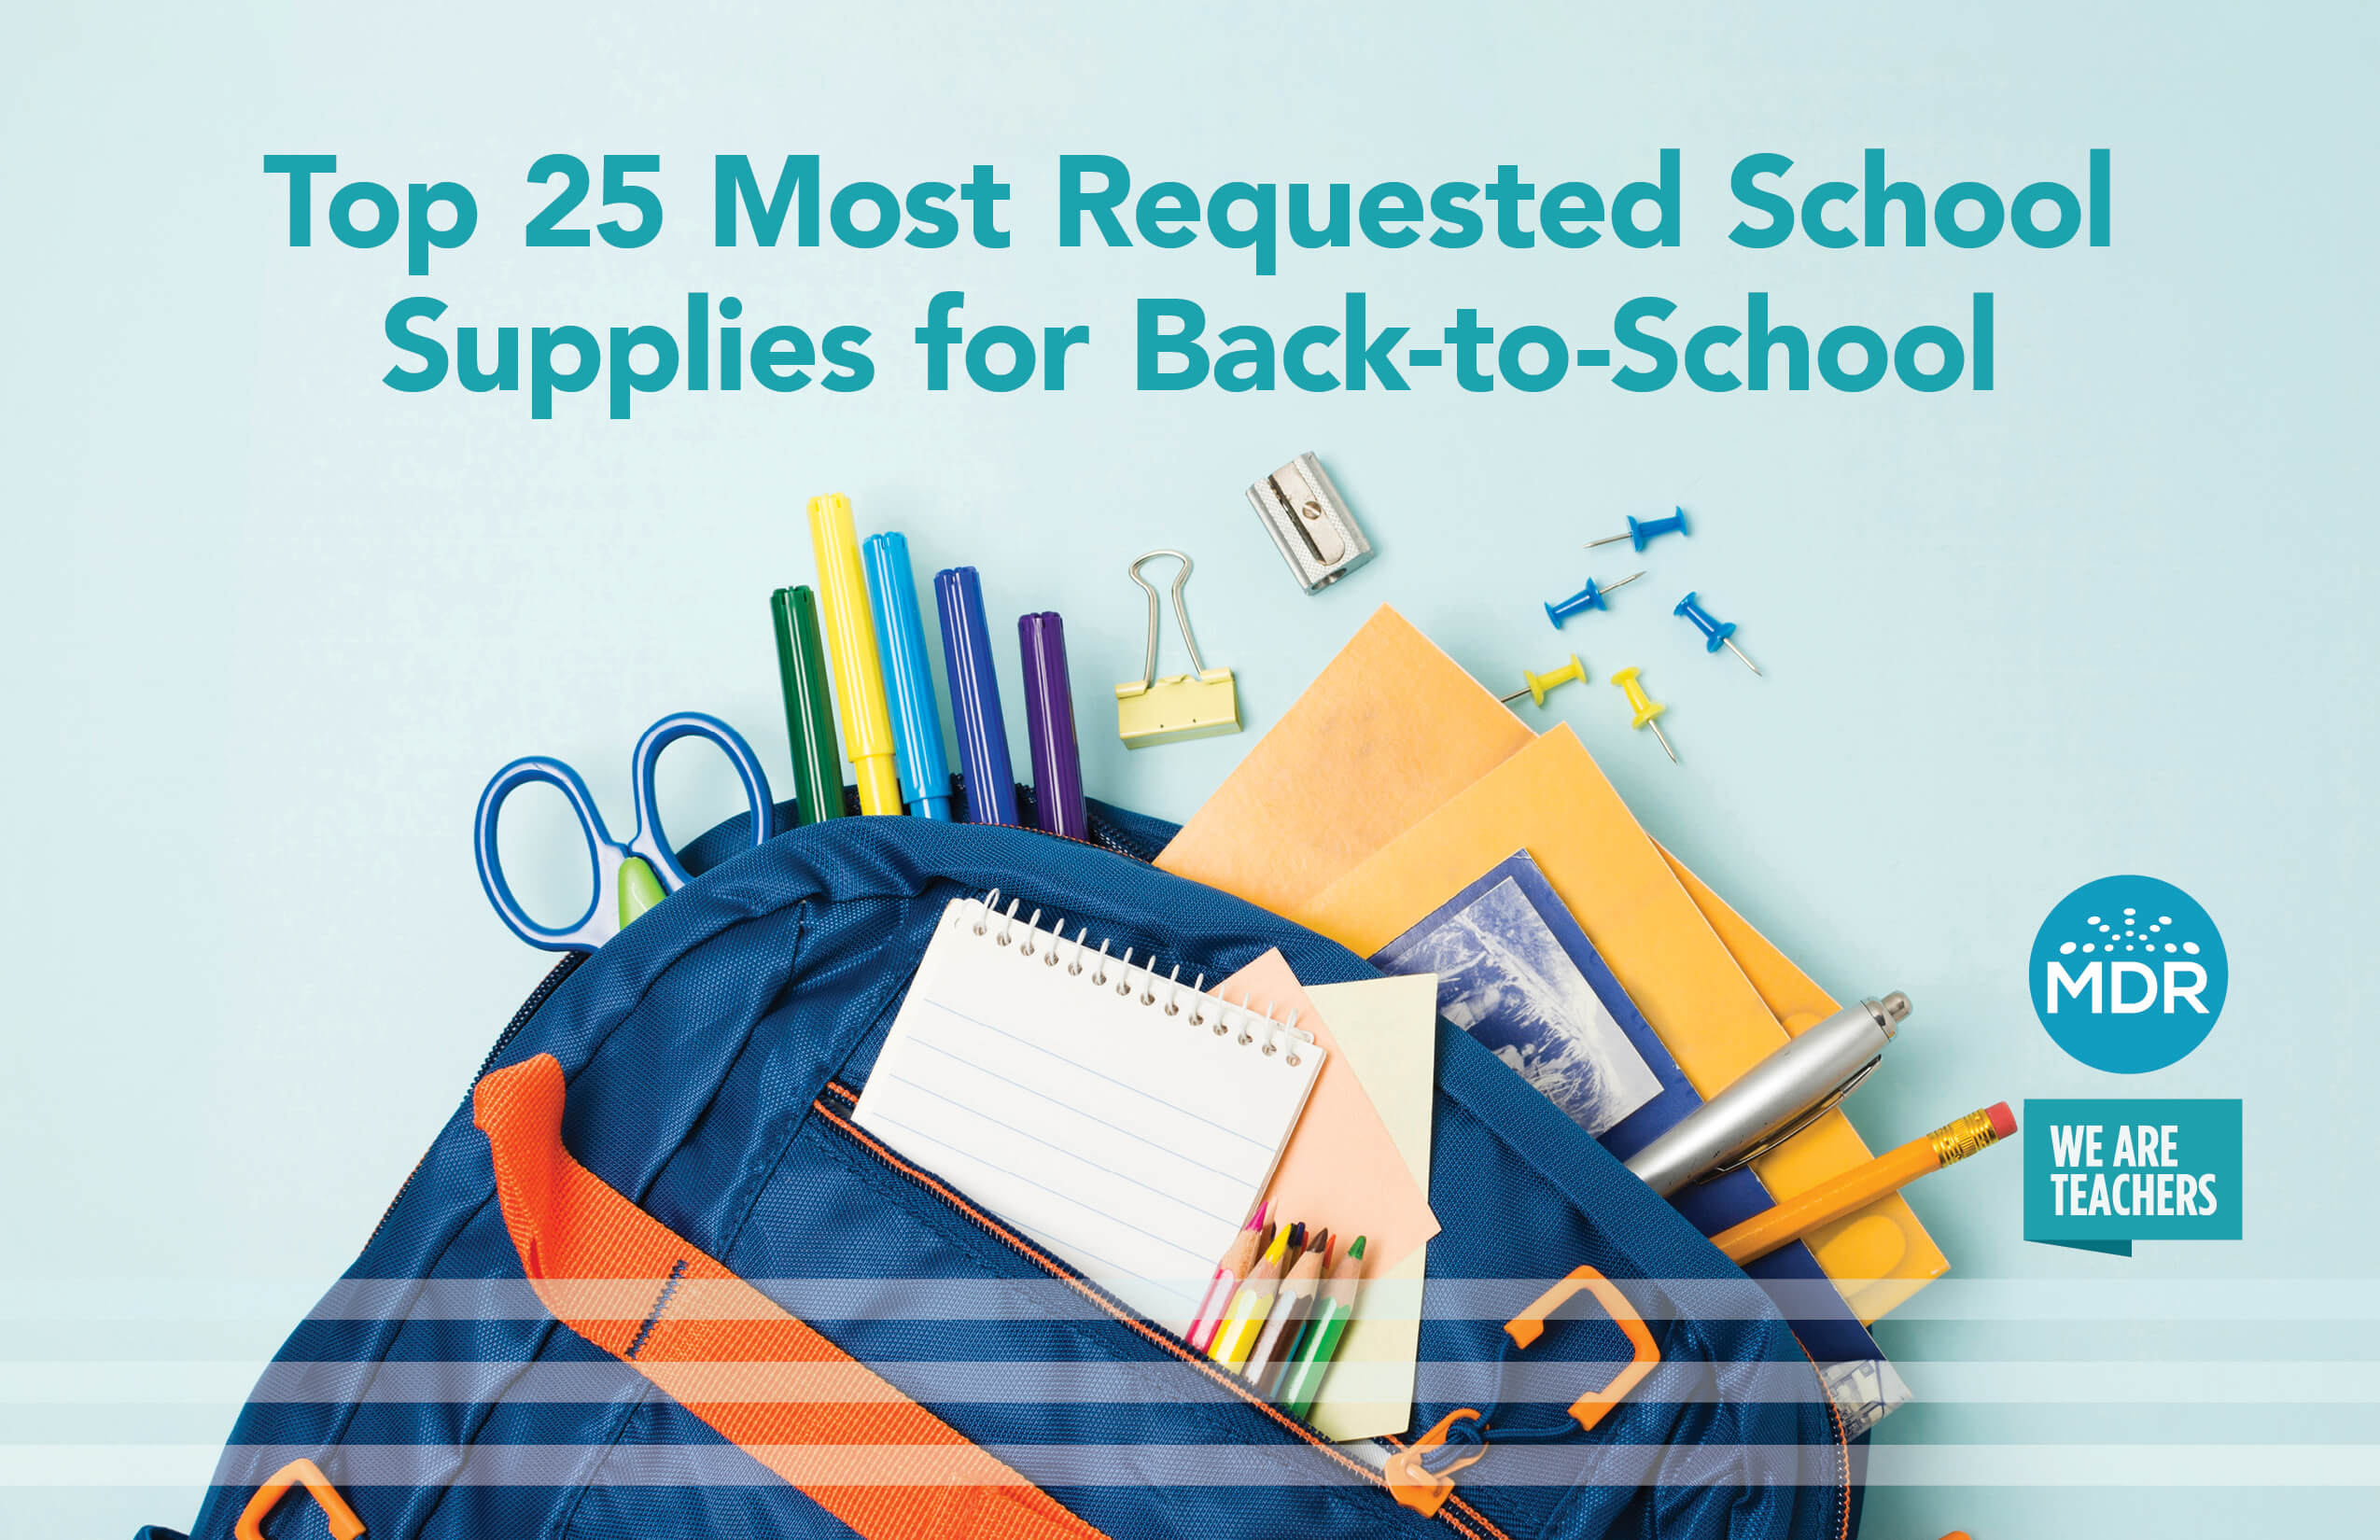 Top 25 Most Requested School Supplies for Back-to-School